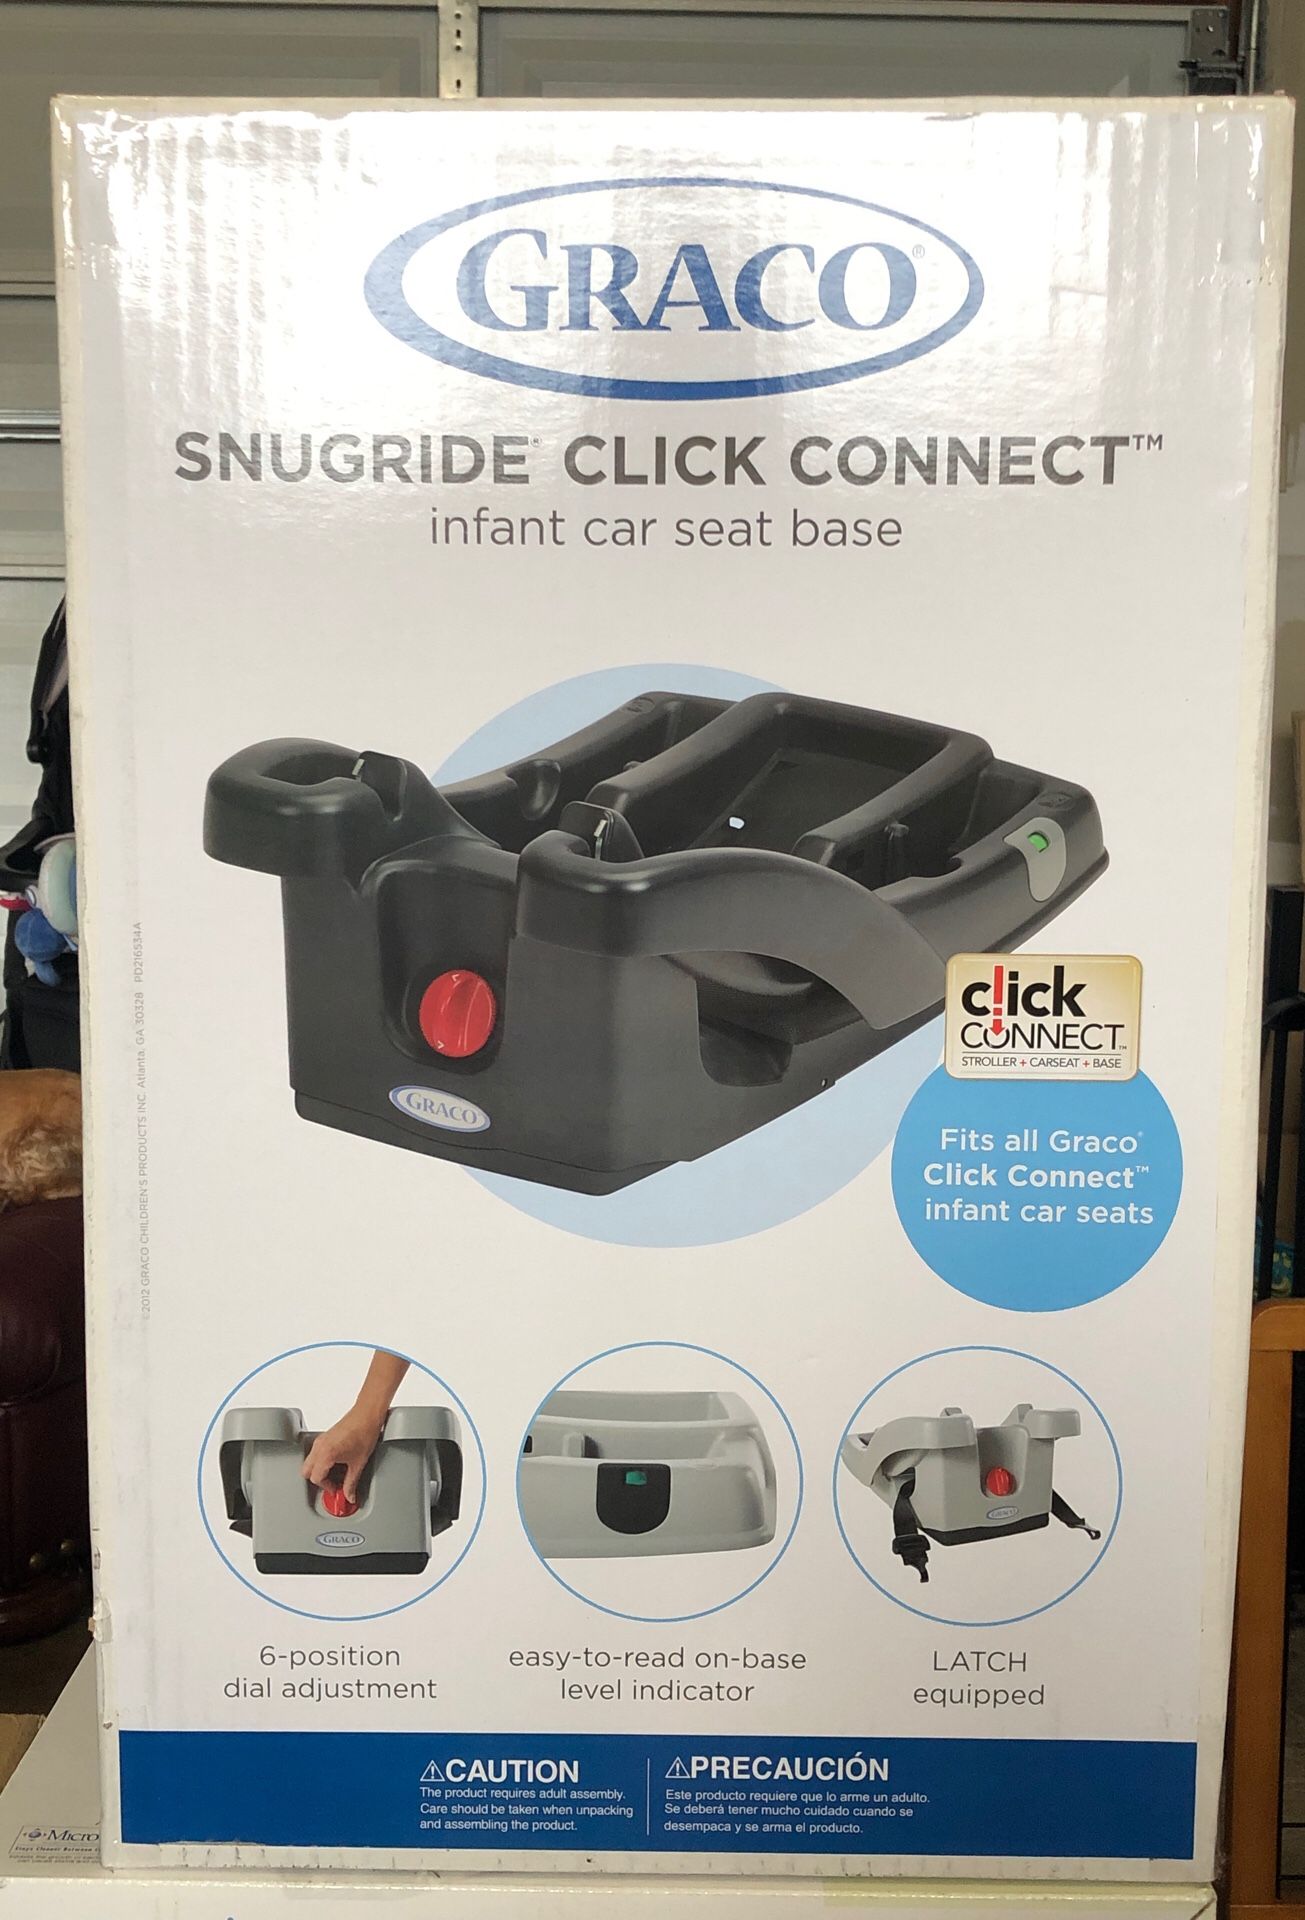 Graco Snugride Click Connect infant car seat base - NEVER OPENED